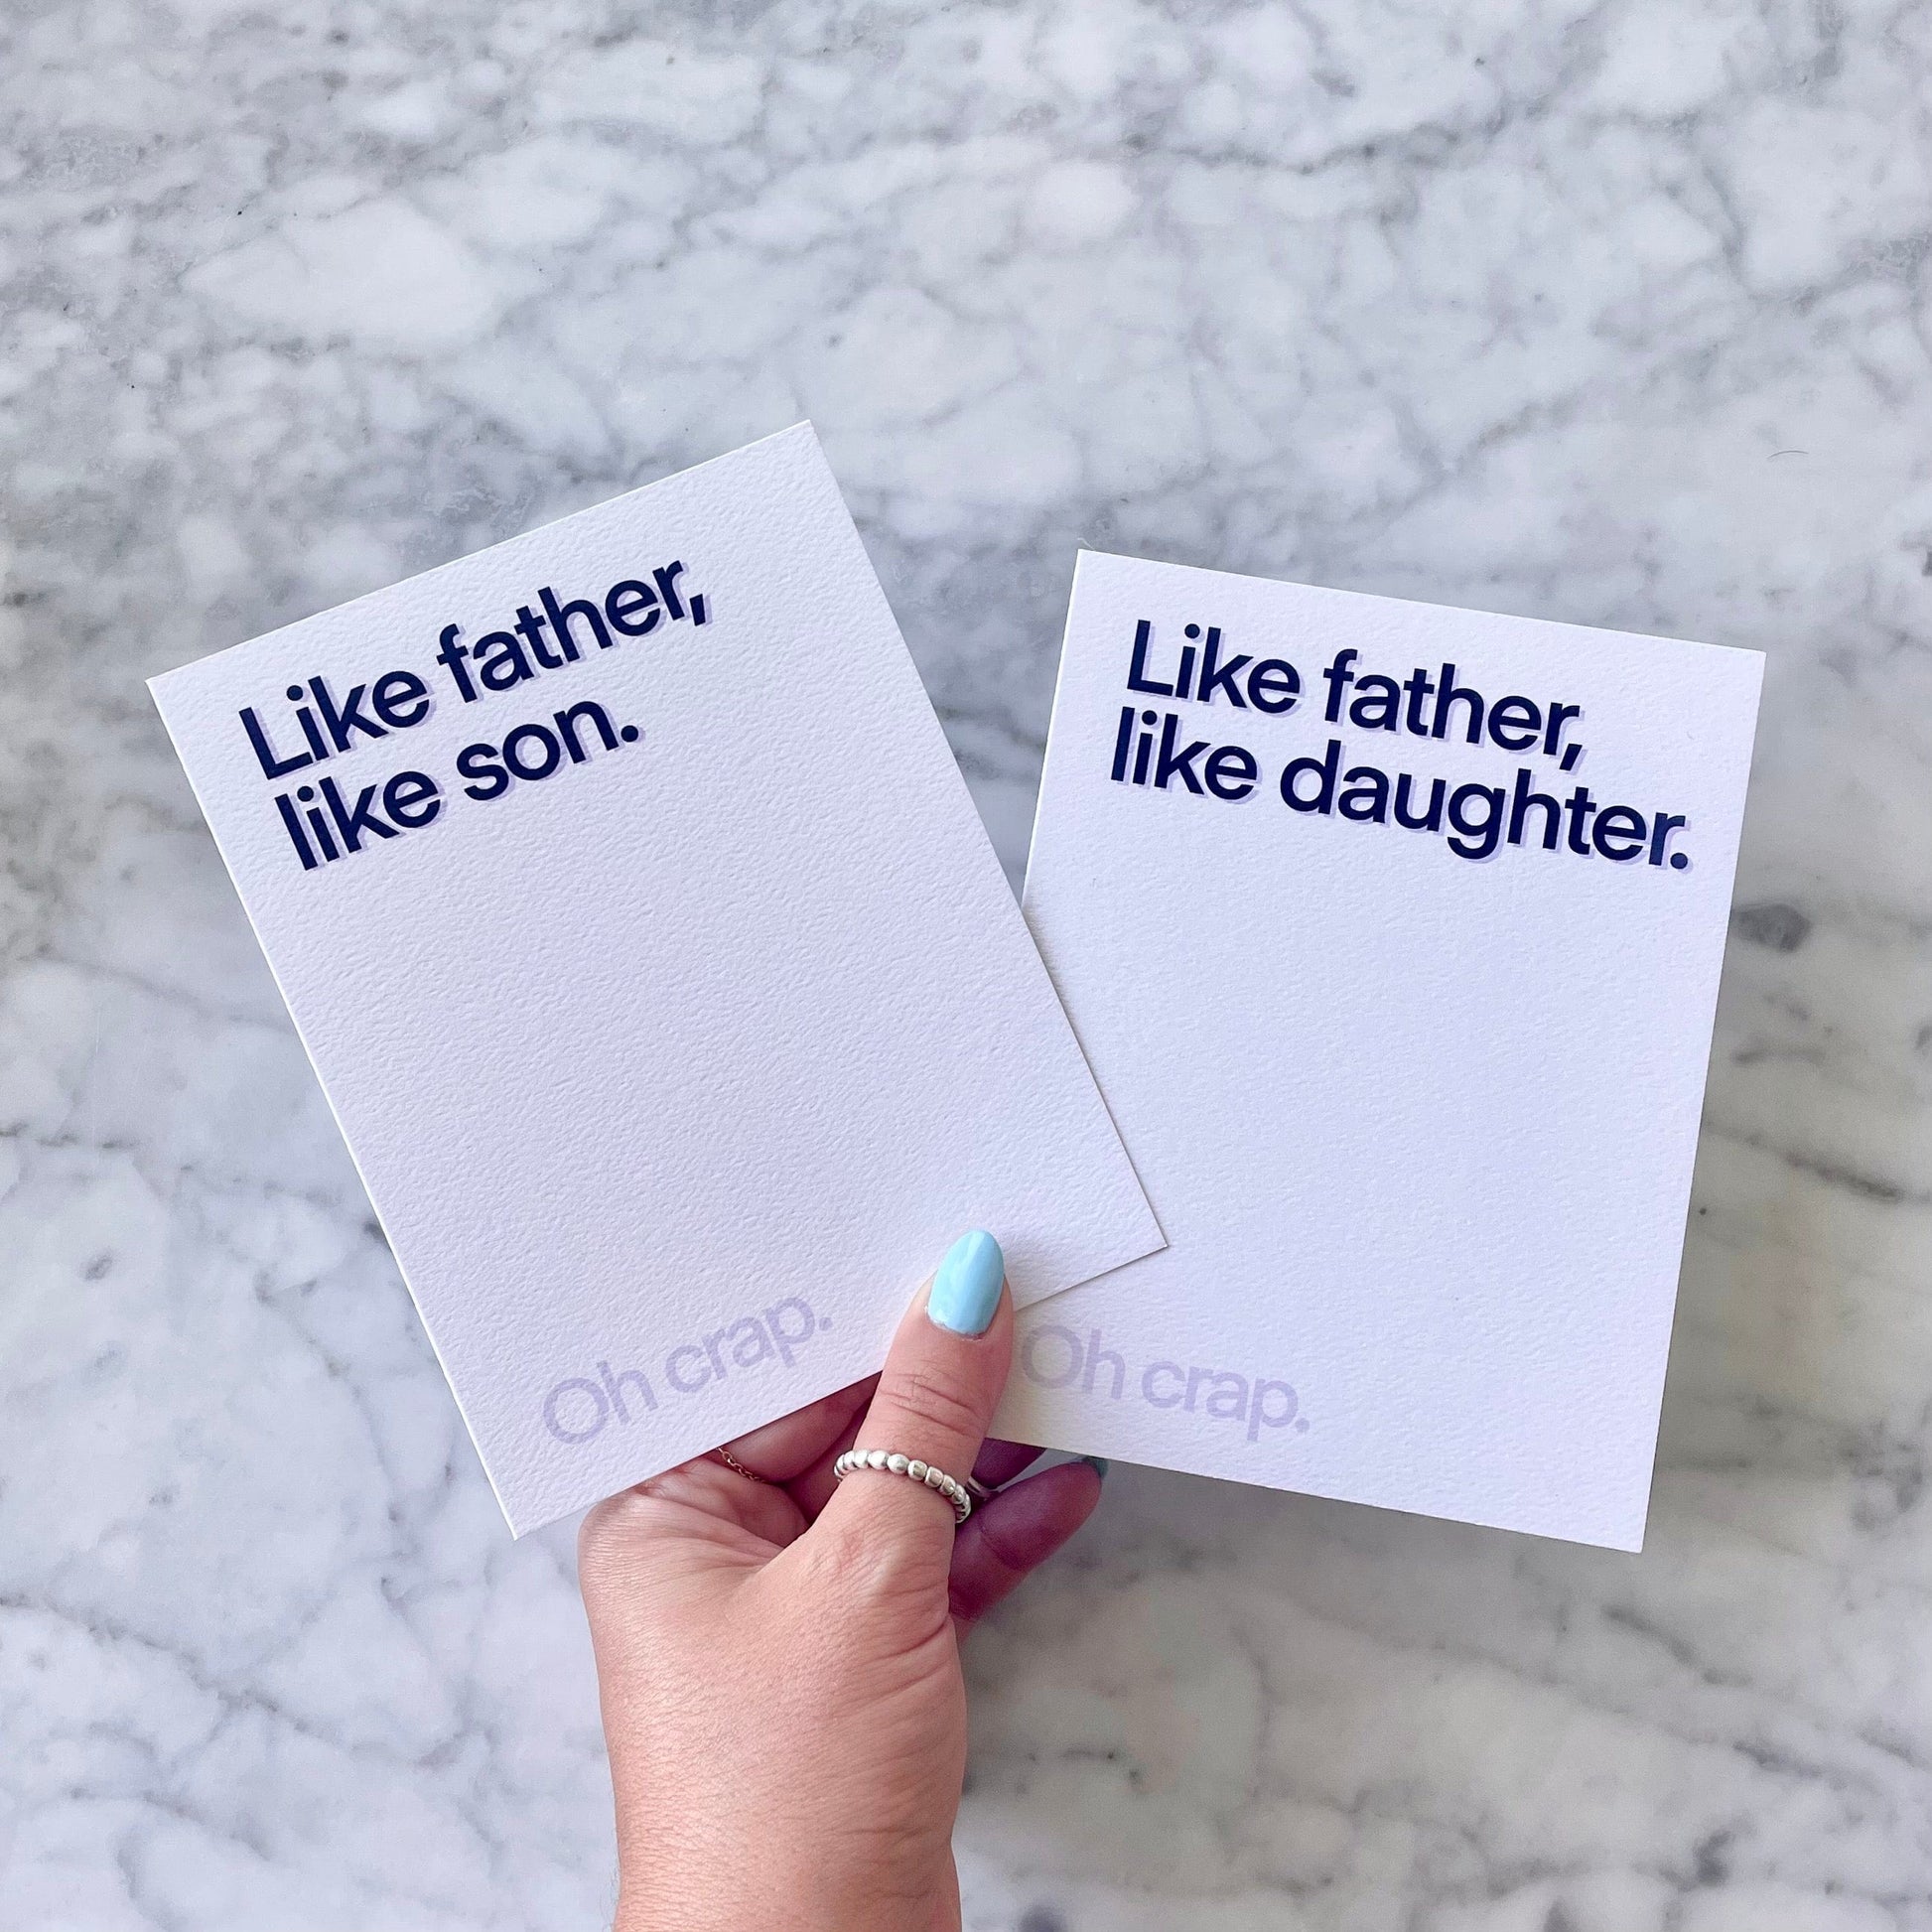 The Like Father, Oh Crap Card. Father's Day Card. Dad's Birthday Card.